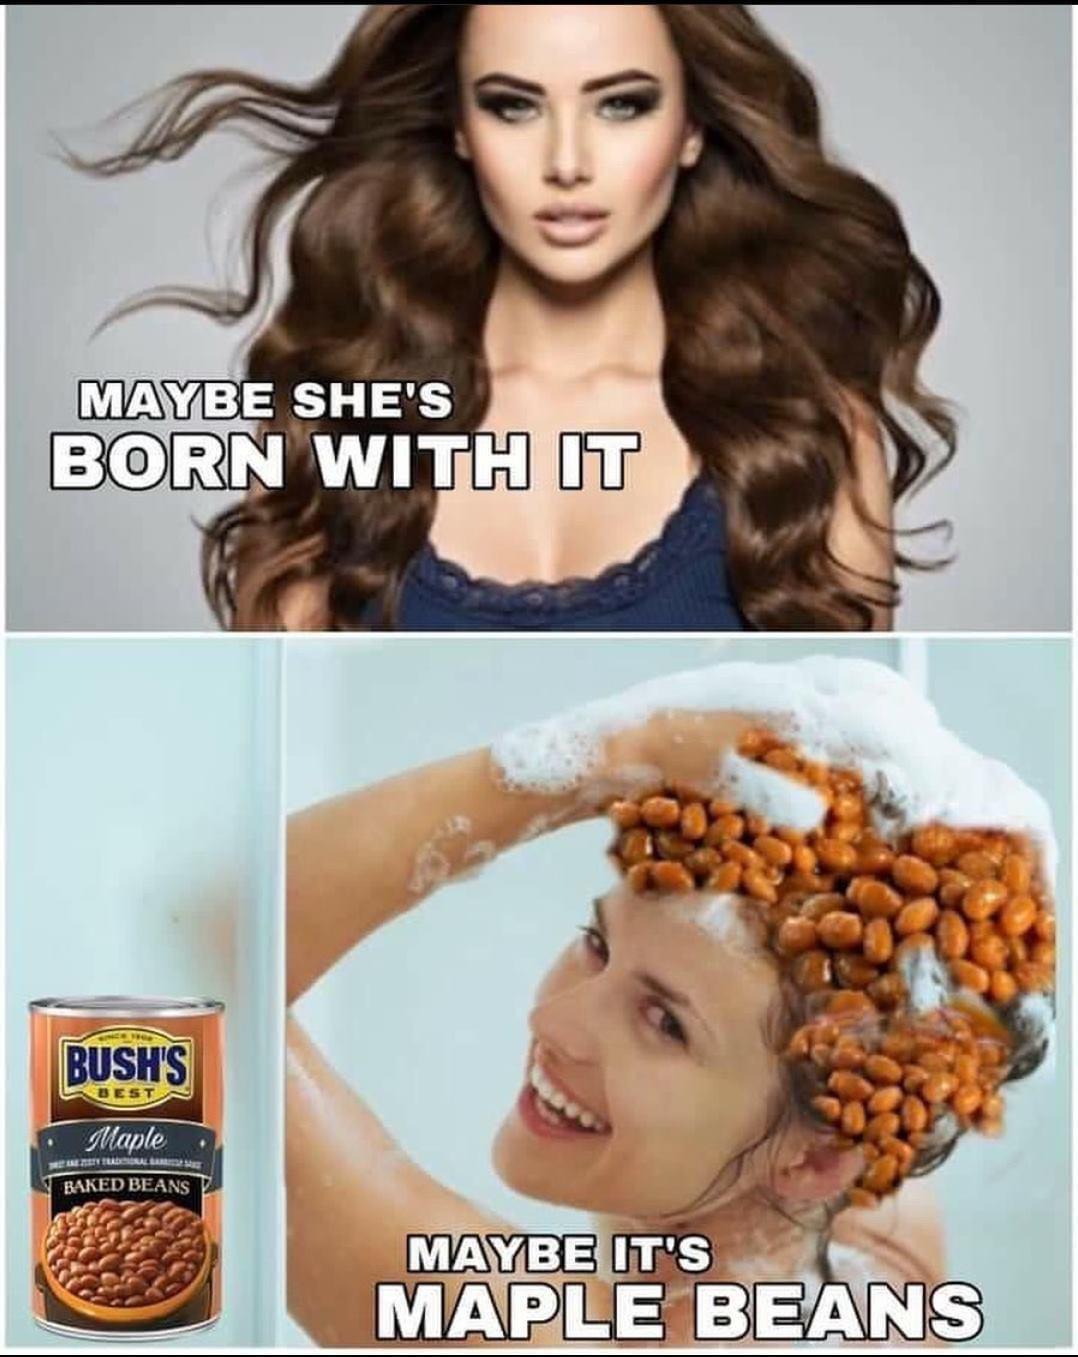 maybe she's born with it maybe it's maple beans - Maybe She'S Born With It Bush'S Best Maple Baked Beans Maybe It'S Maple Beans